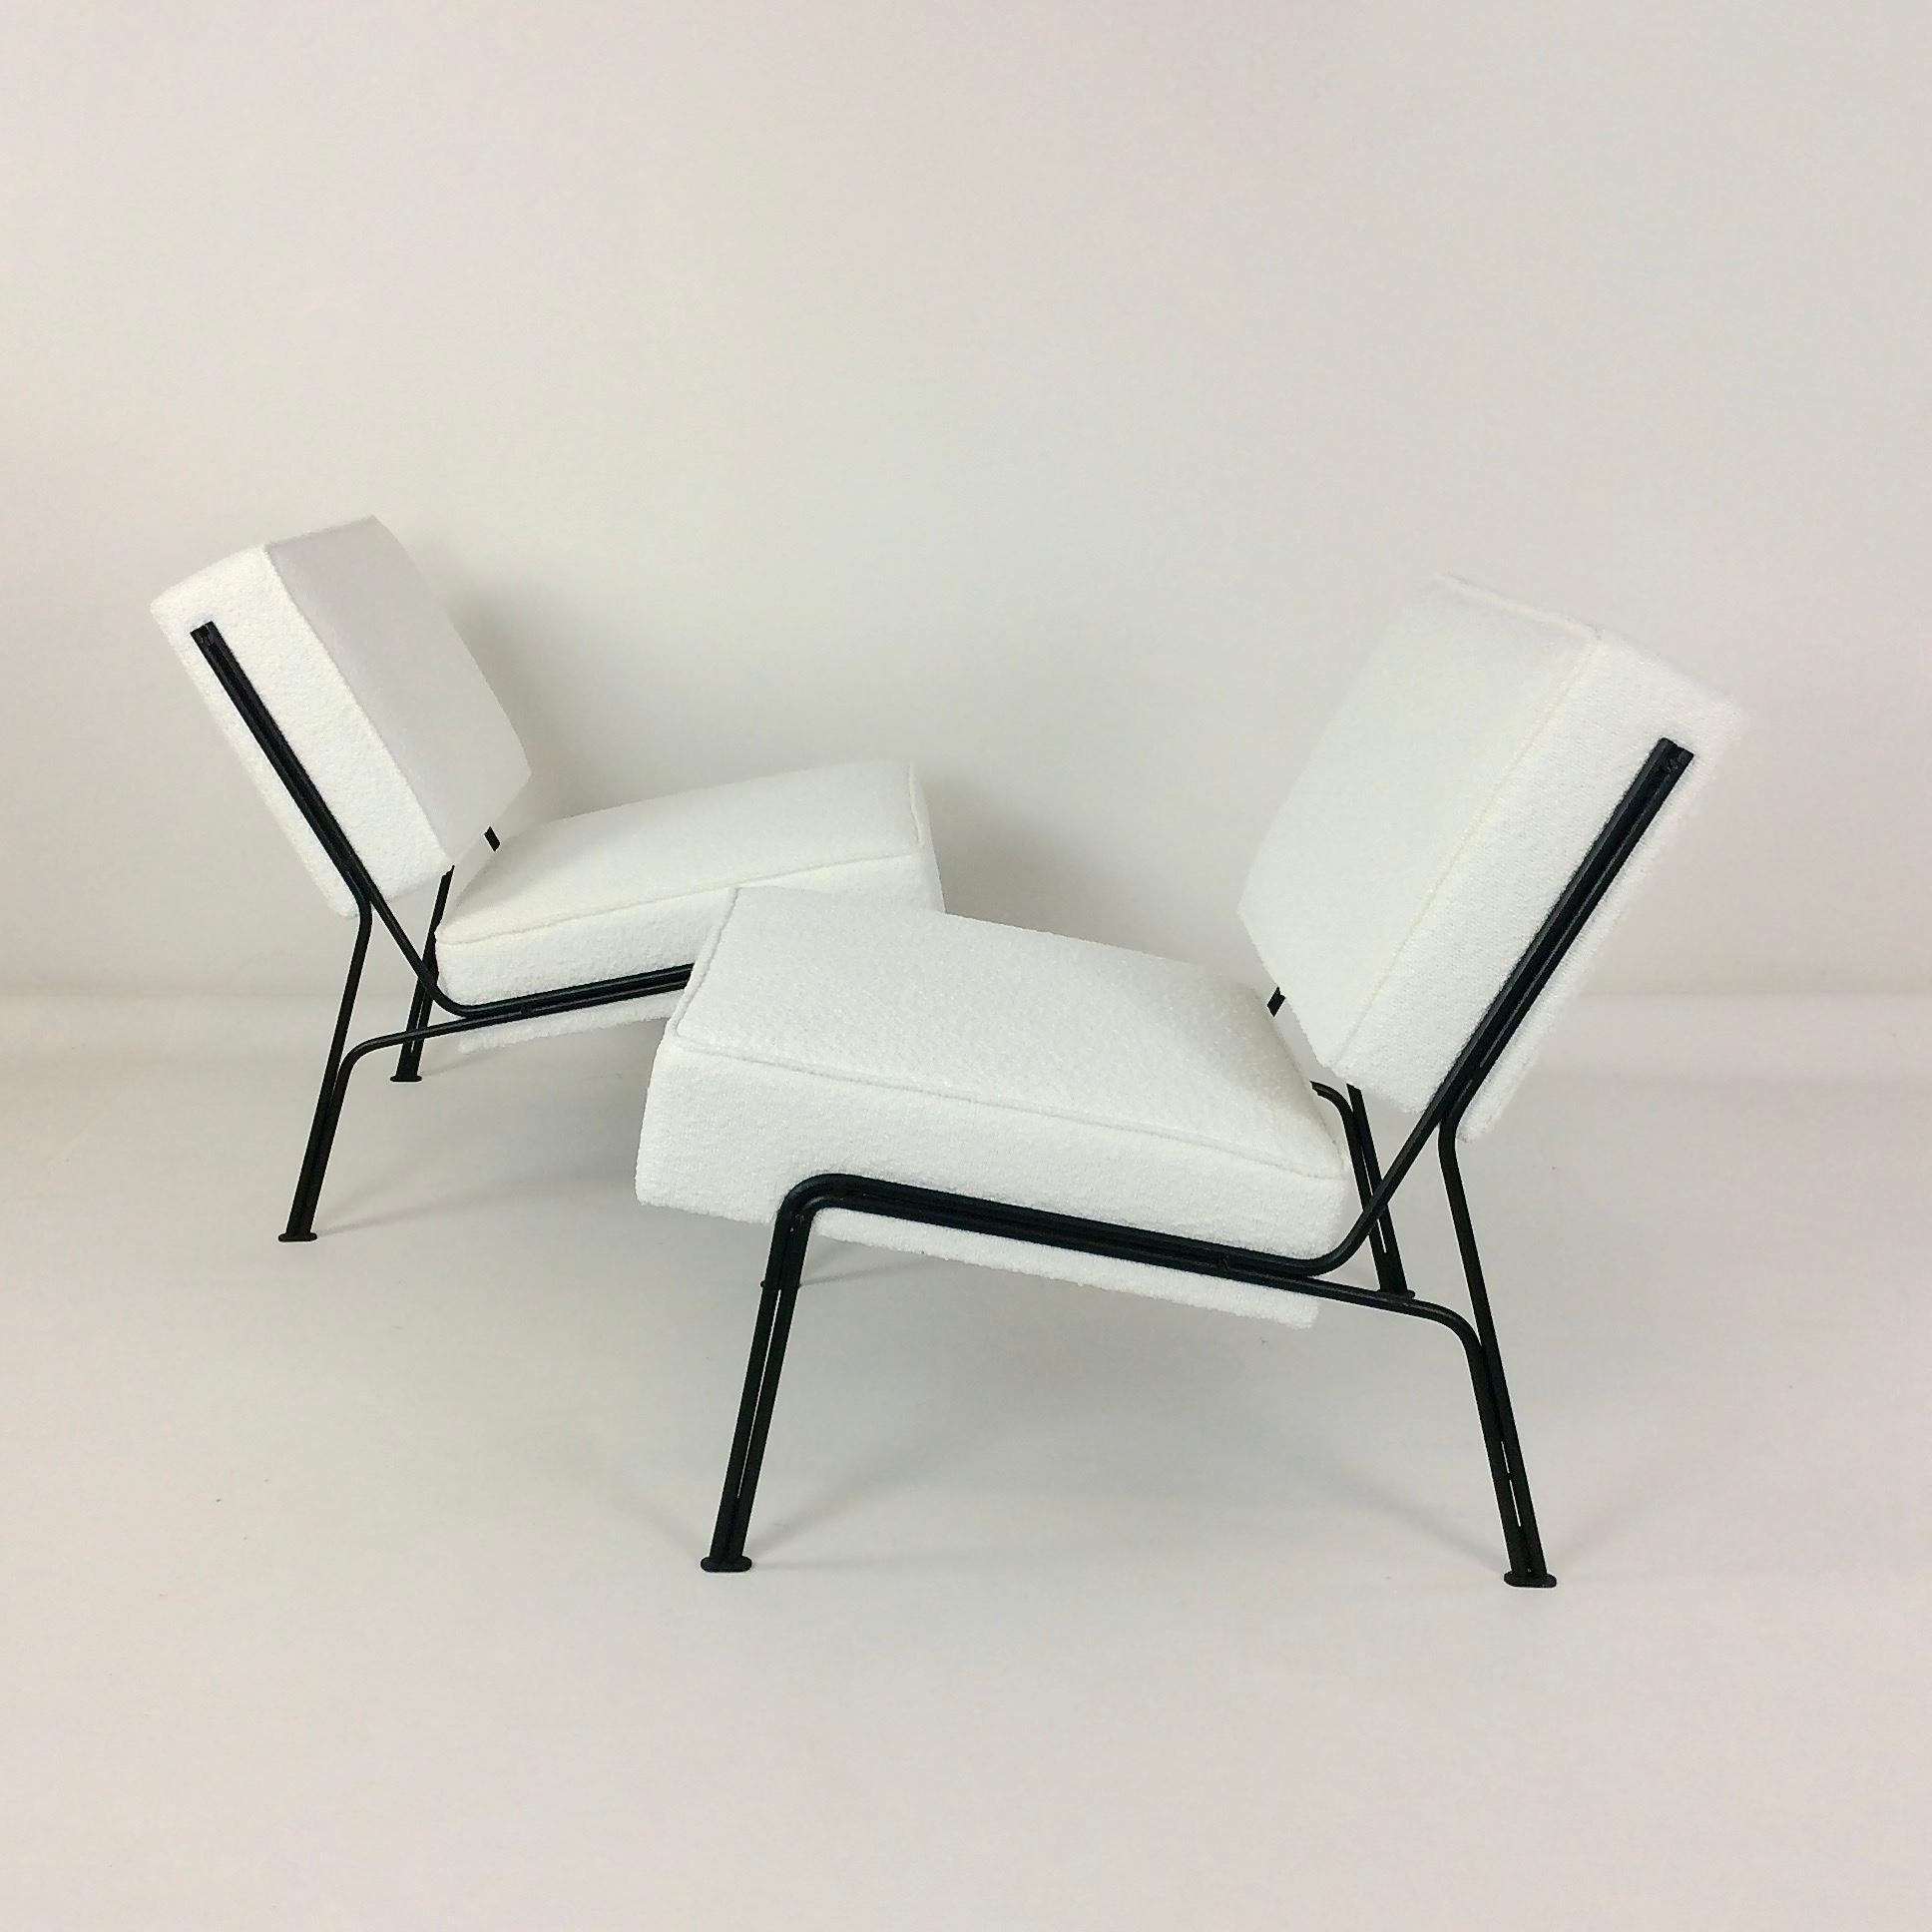 Metal Pair of G2 Chairs By A.R.P. Guariche, Motte, Mortier for Airborne, 1953, France. For Sale